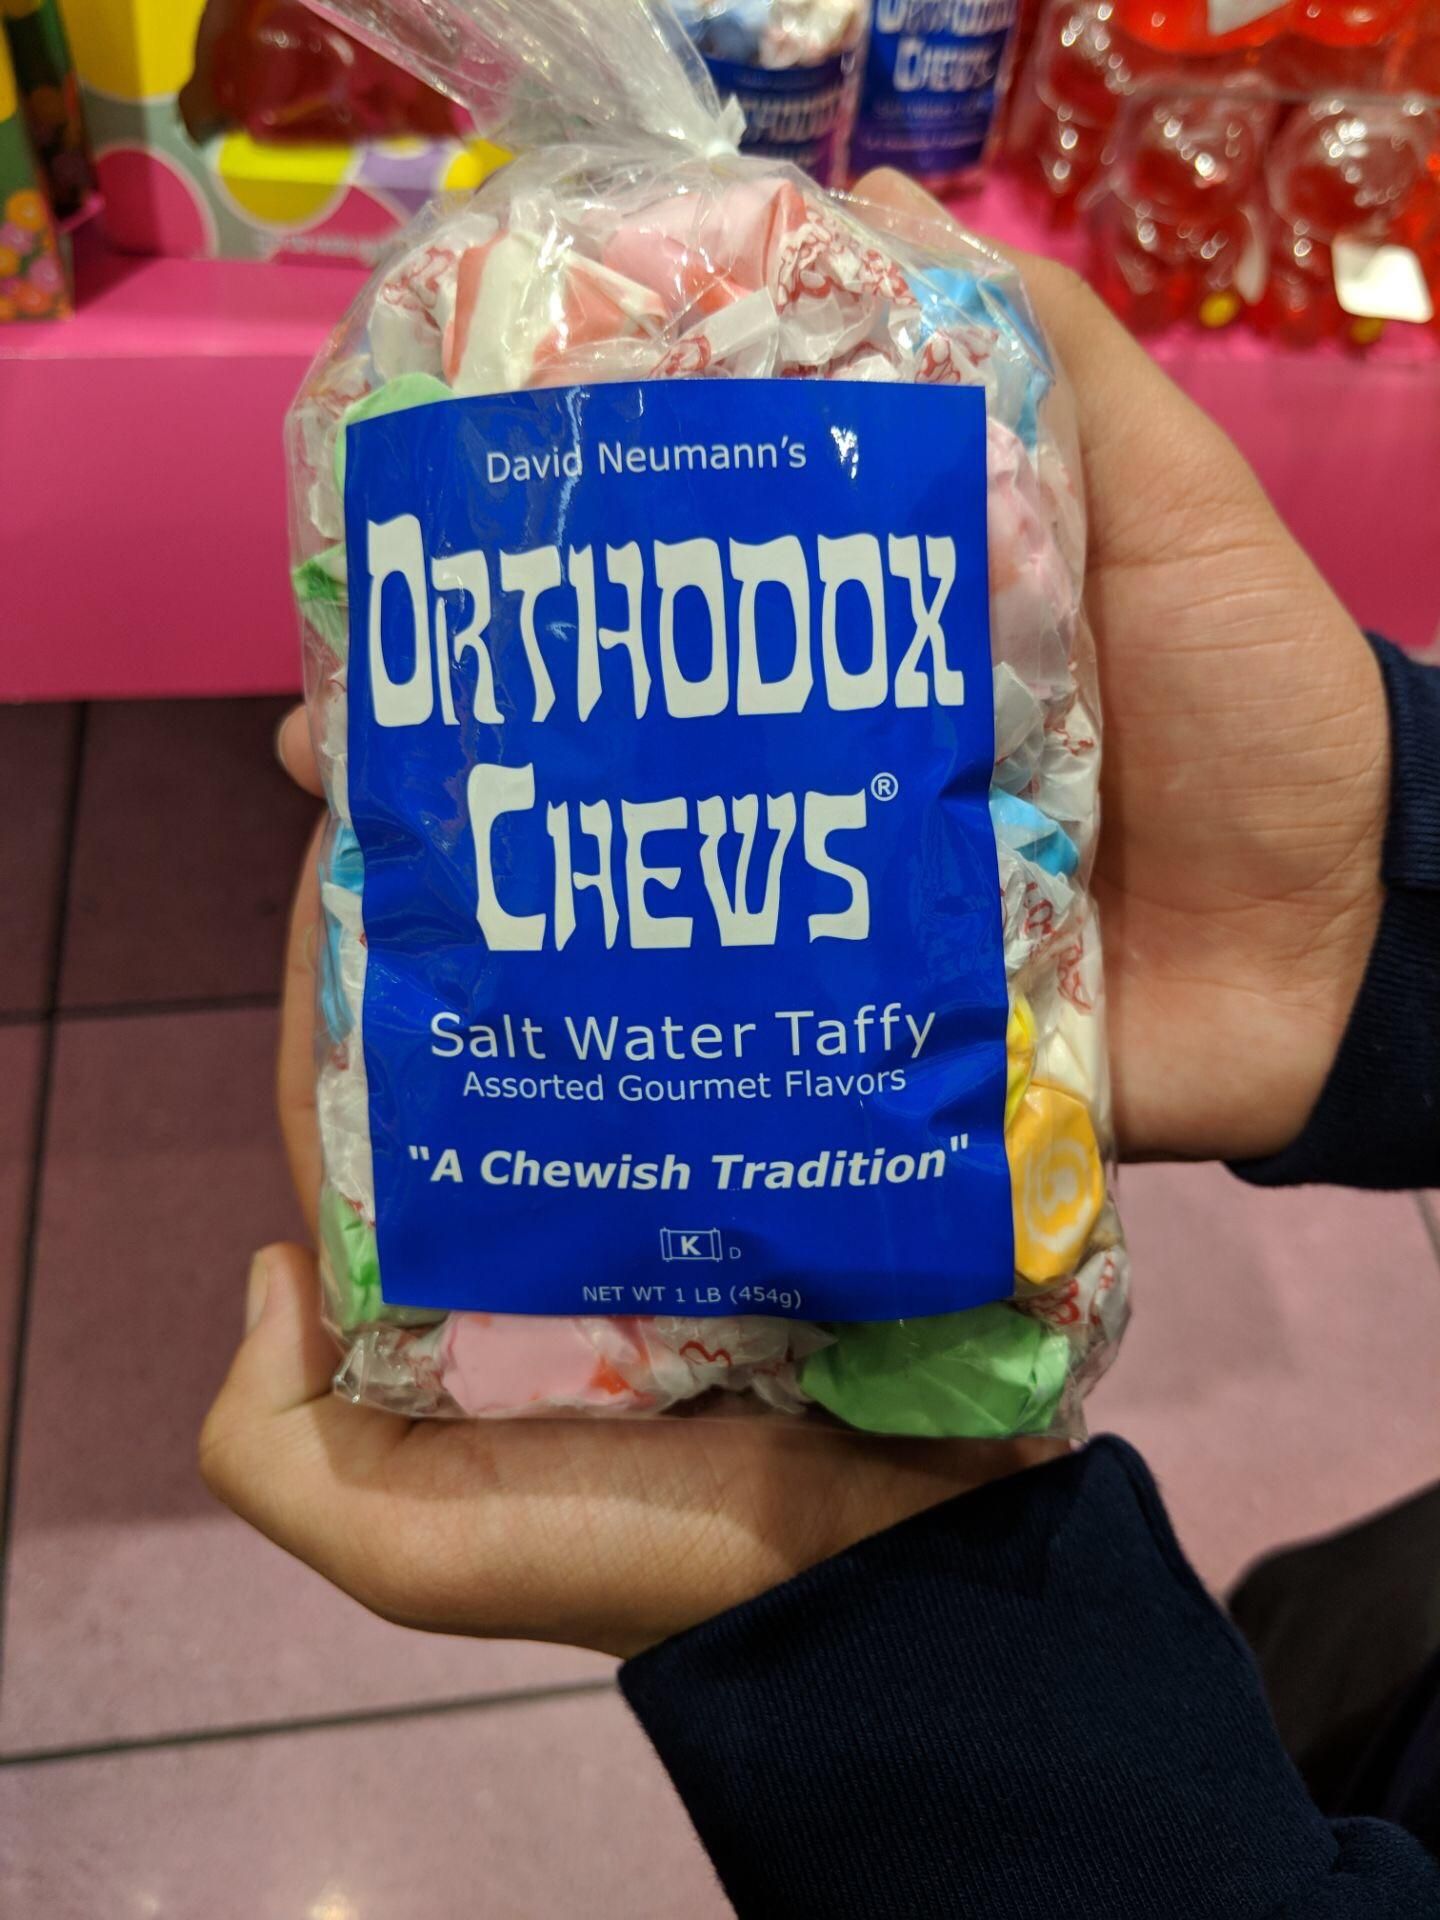 Saw this at a candy store, the name made me laugh